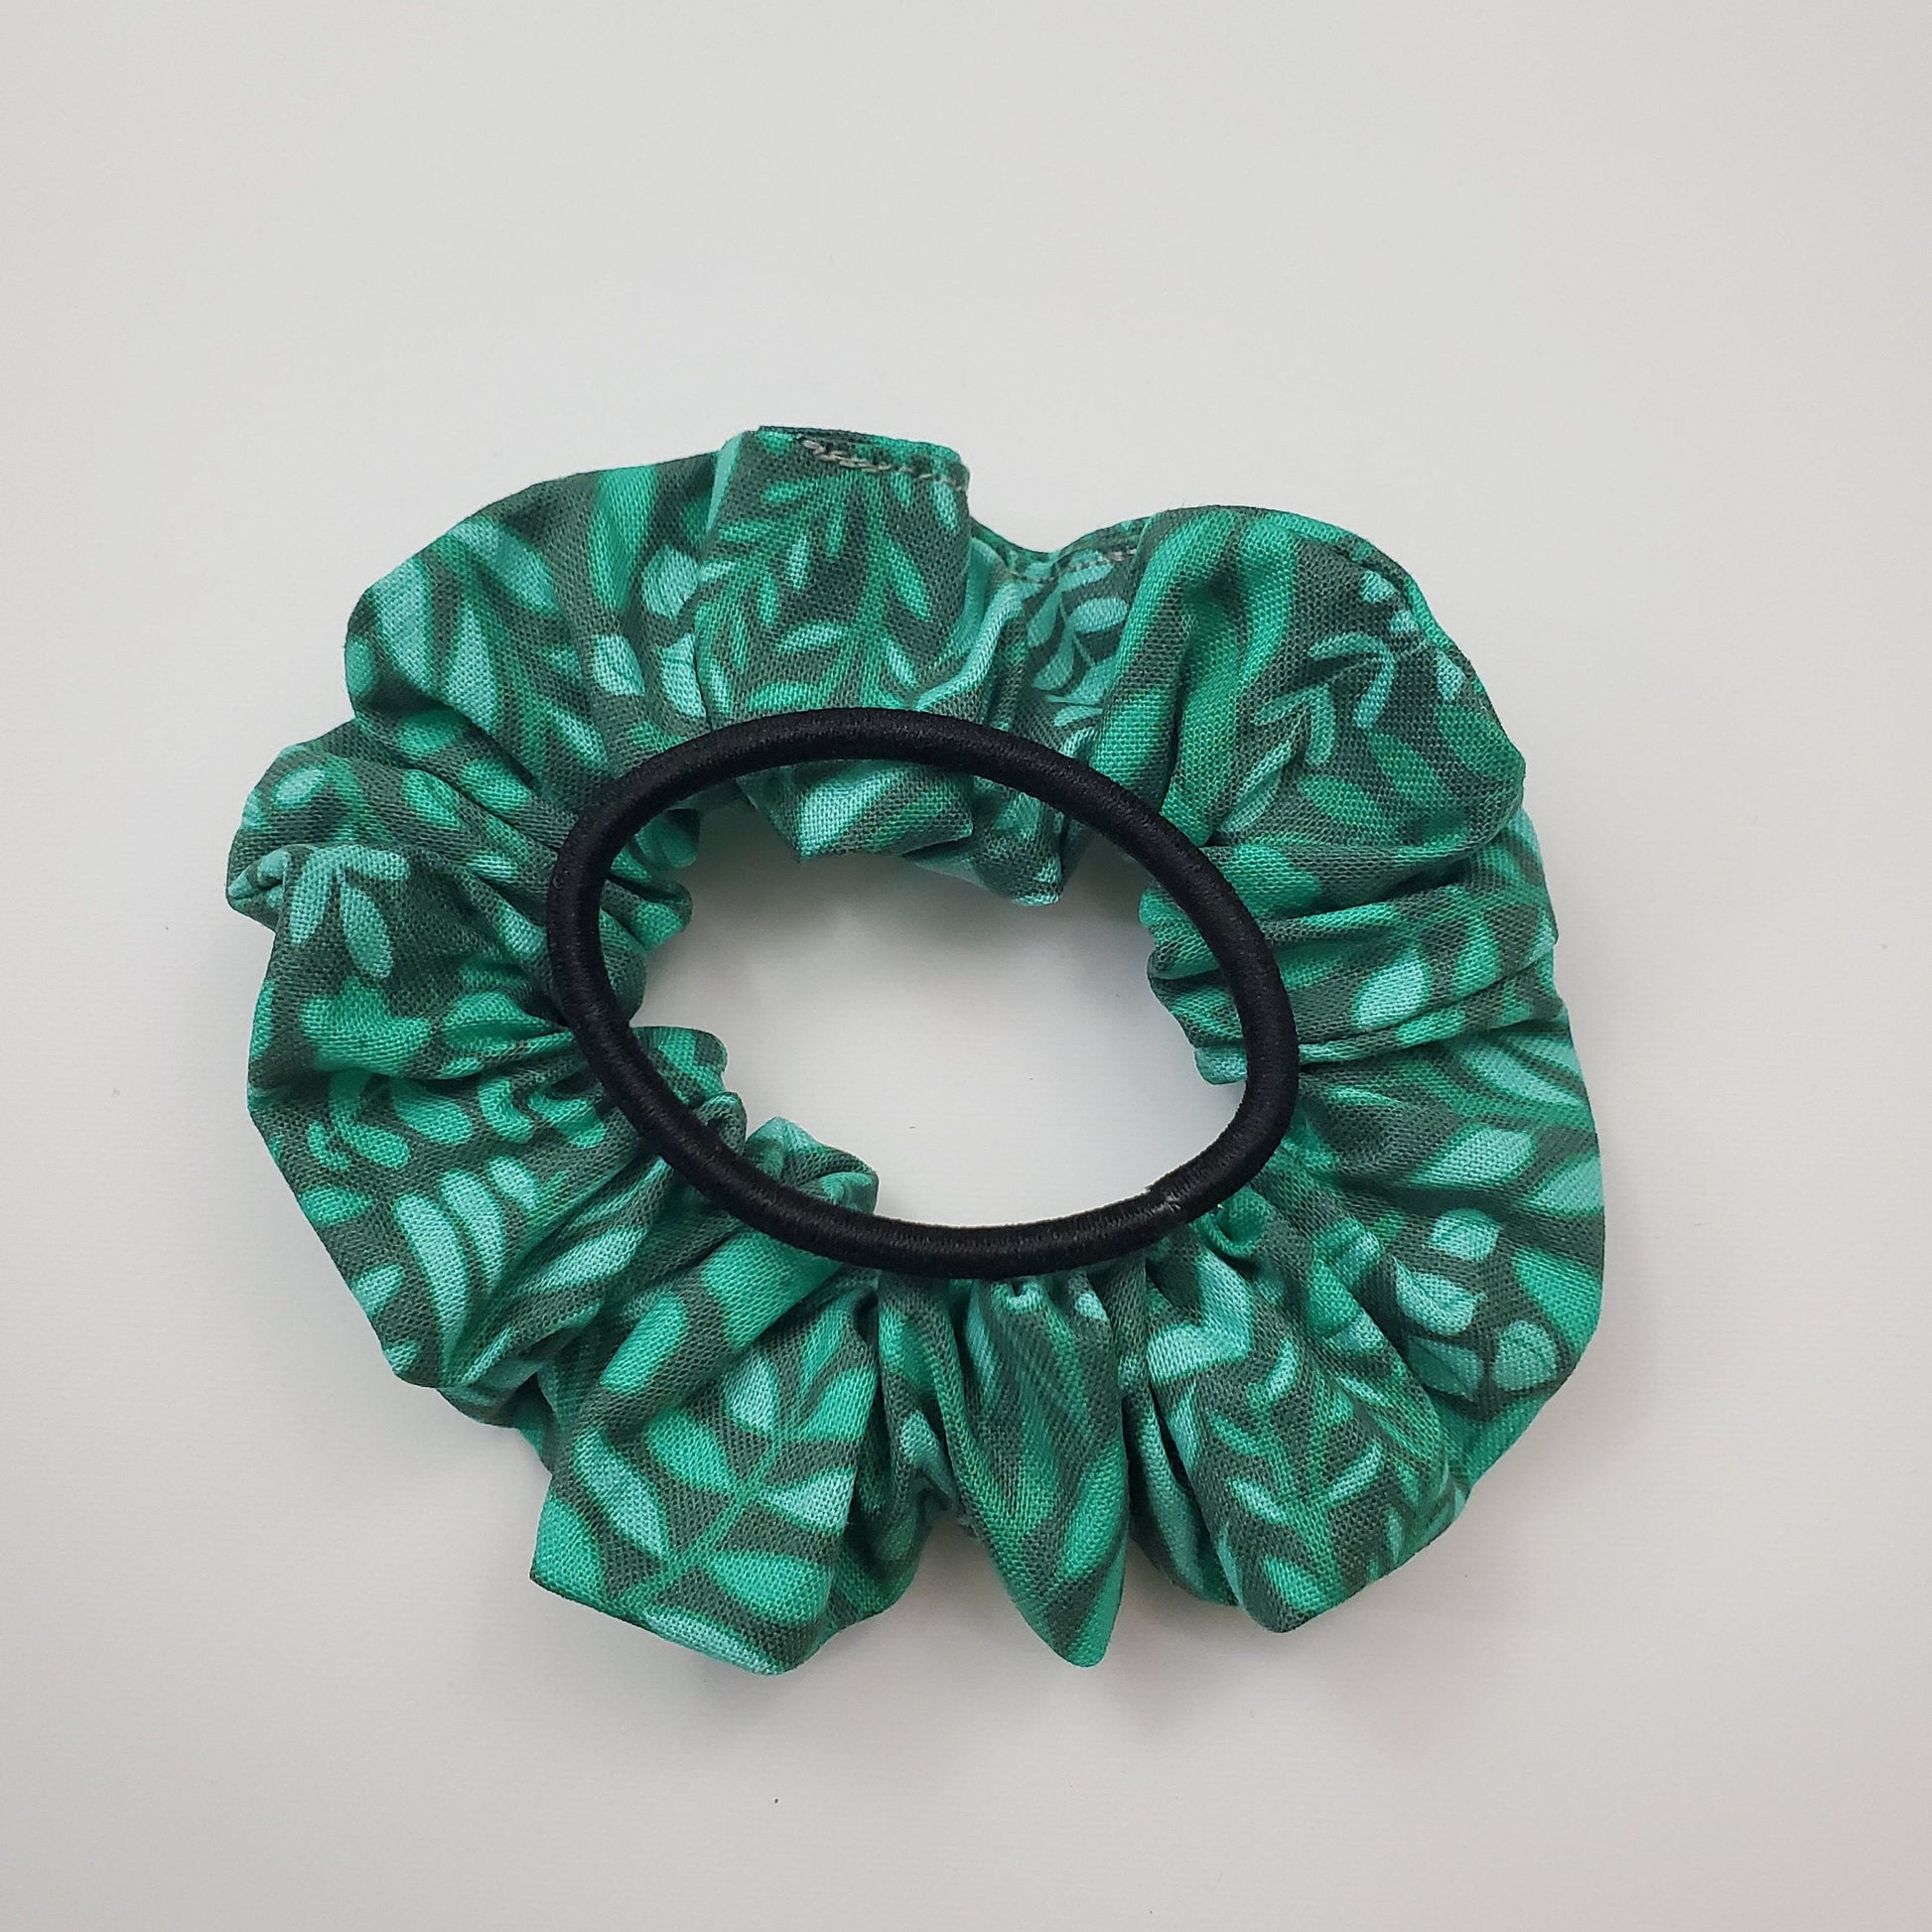 Green leaves scrunchie shown with a regular black hair tie on top for size reference. 